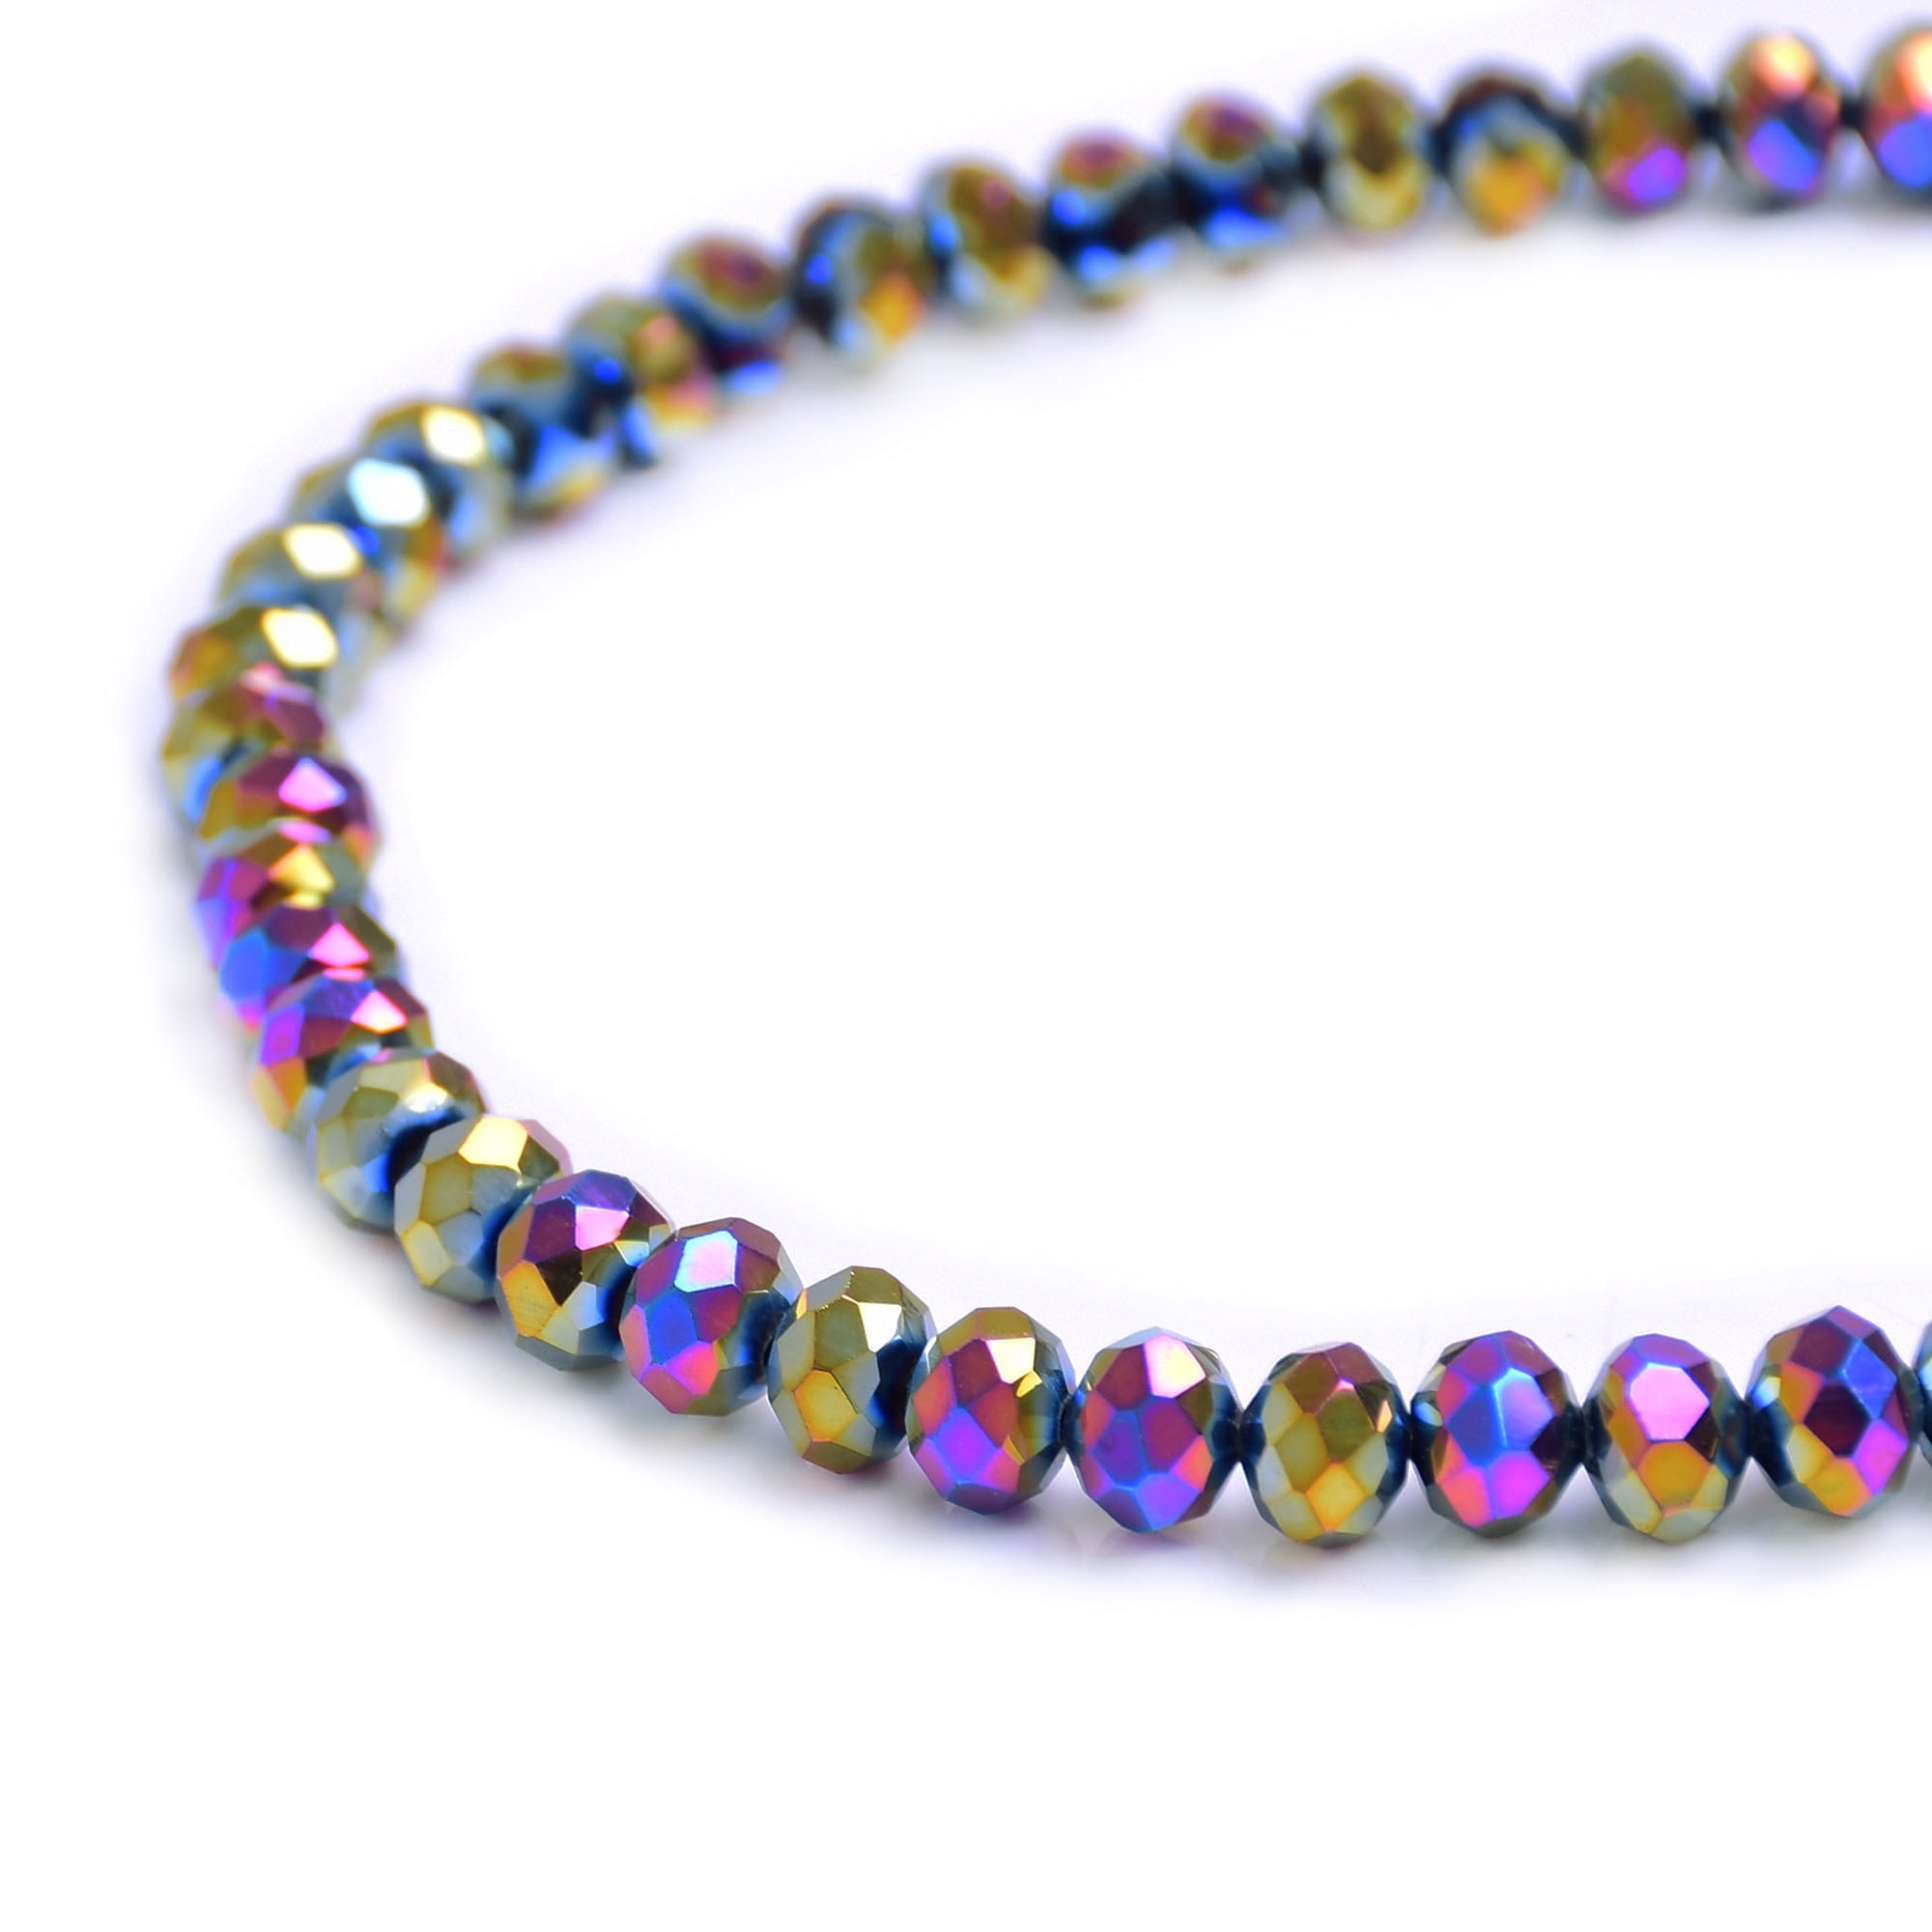 Czech Glass Faceted Rondelle Beads in Frosted Jewel Tones 1 mm hole 8 mm 25 beads per strand